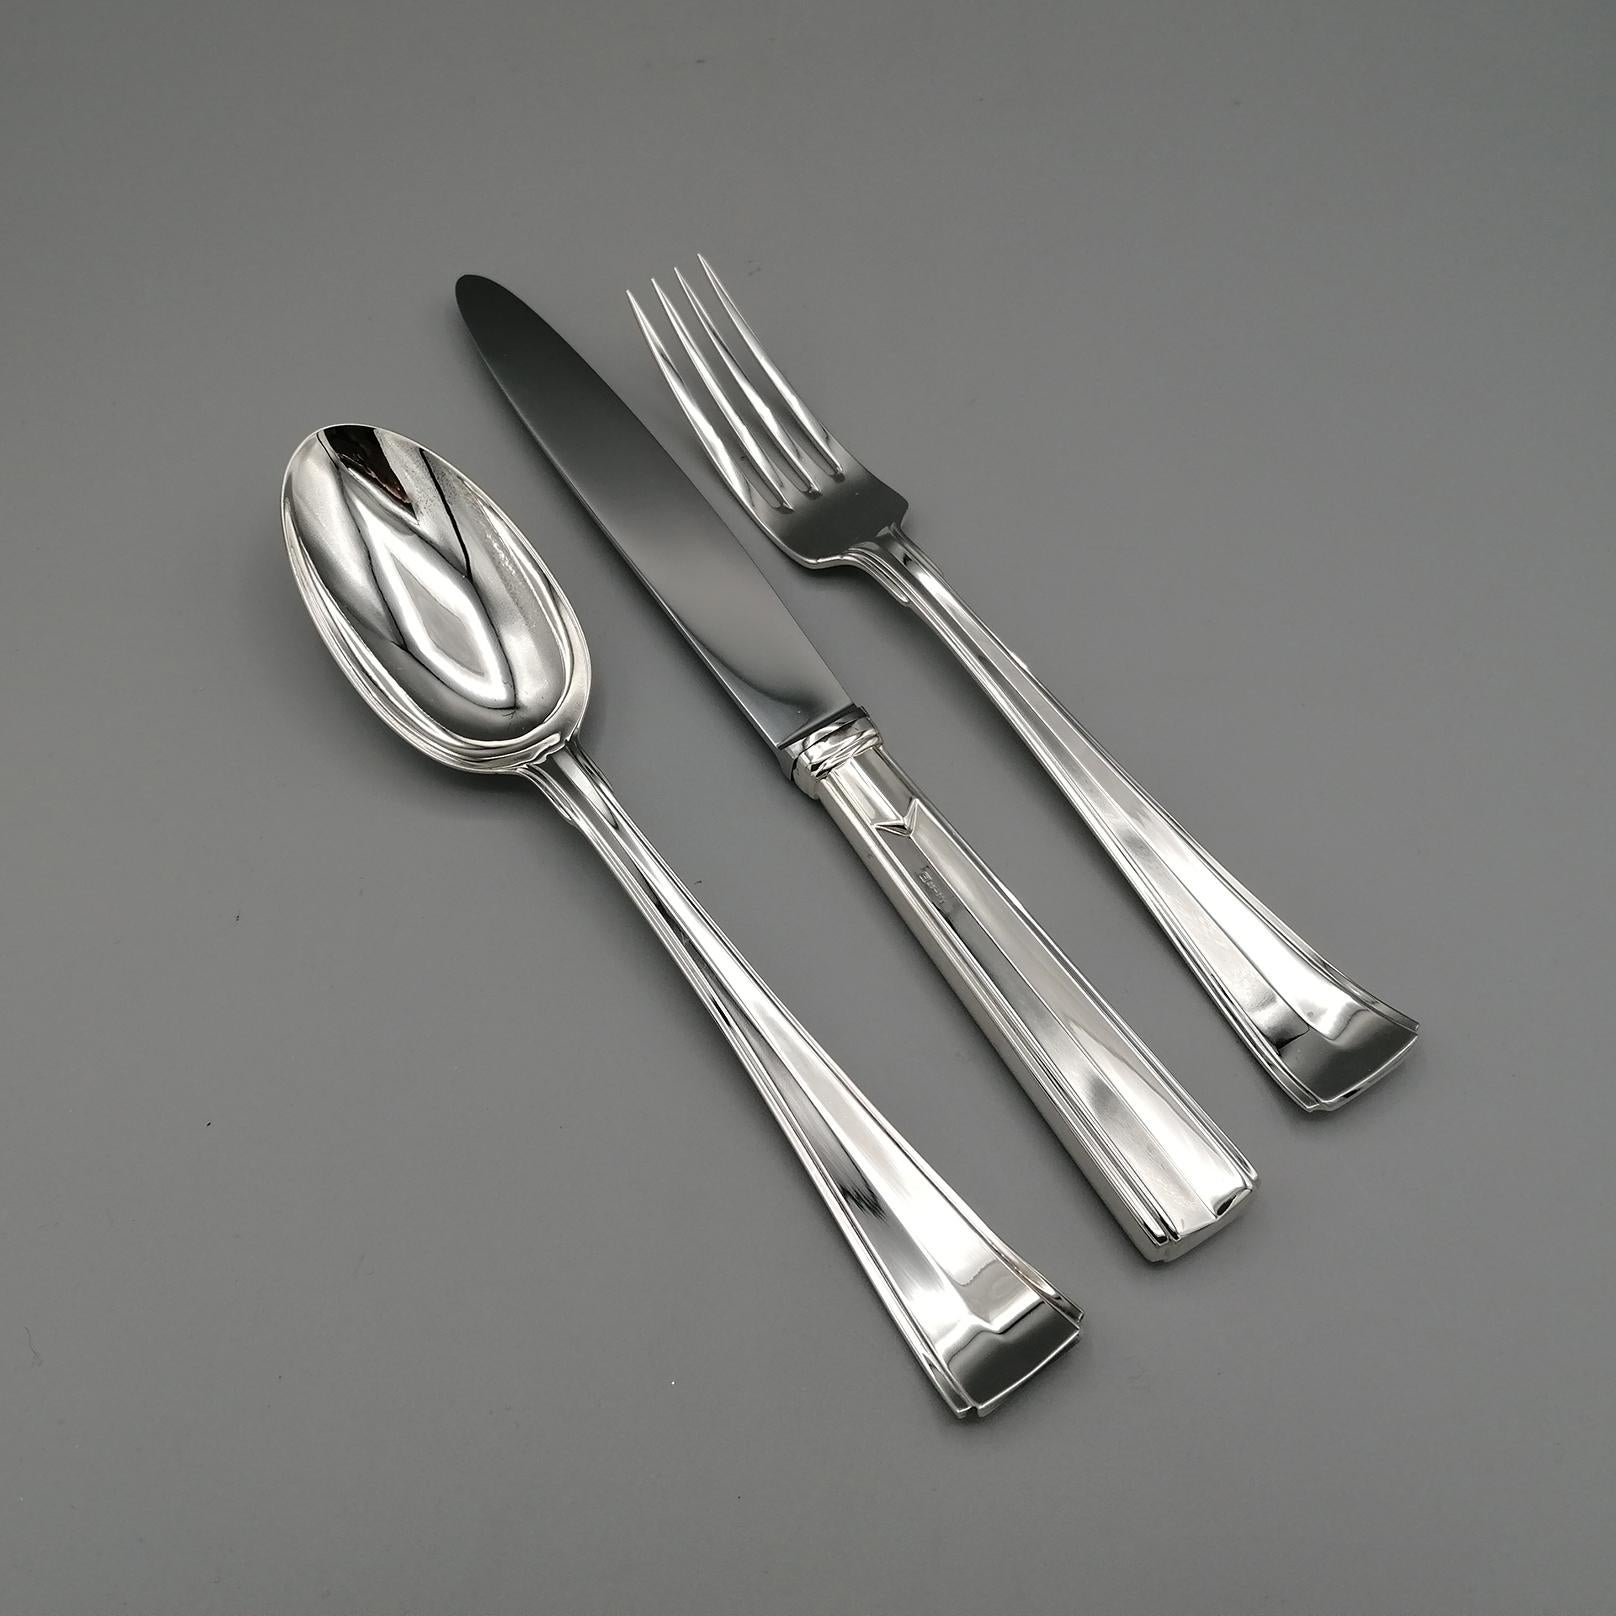 New complete cutlery set 65 pieces in solid silver 